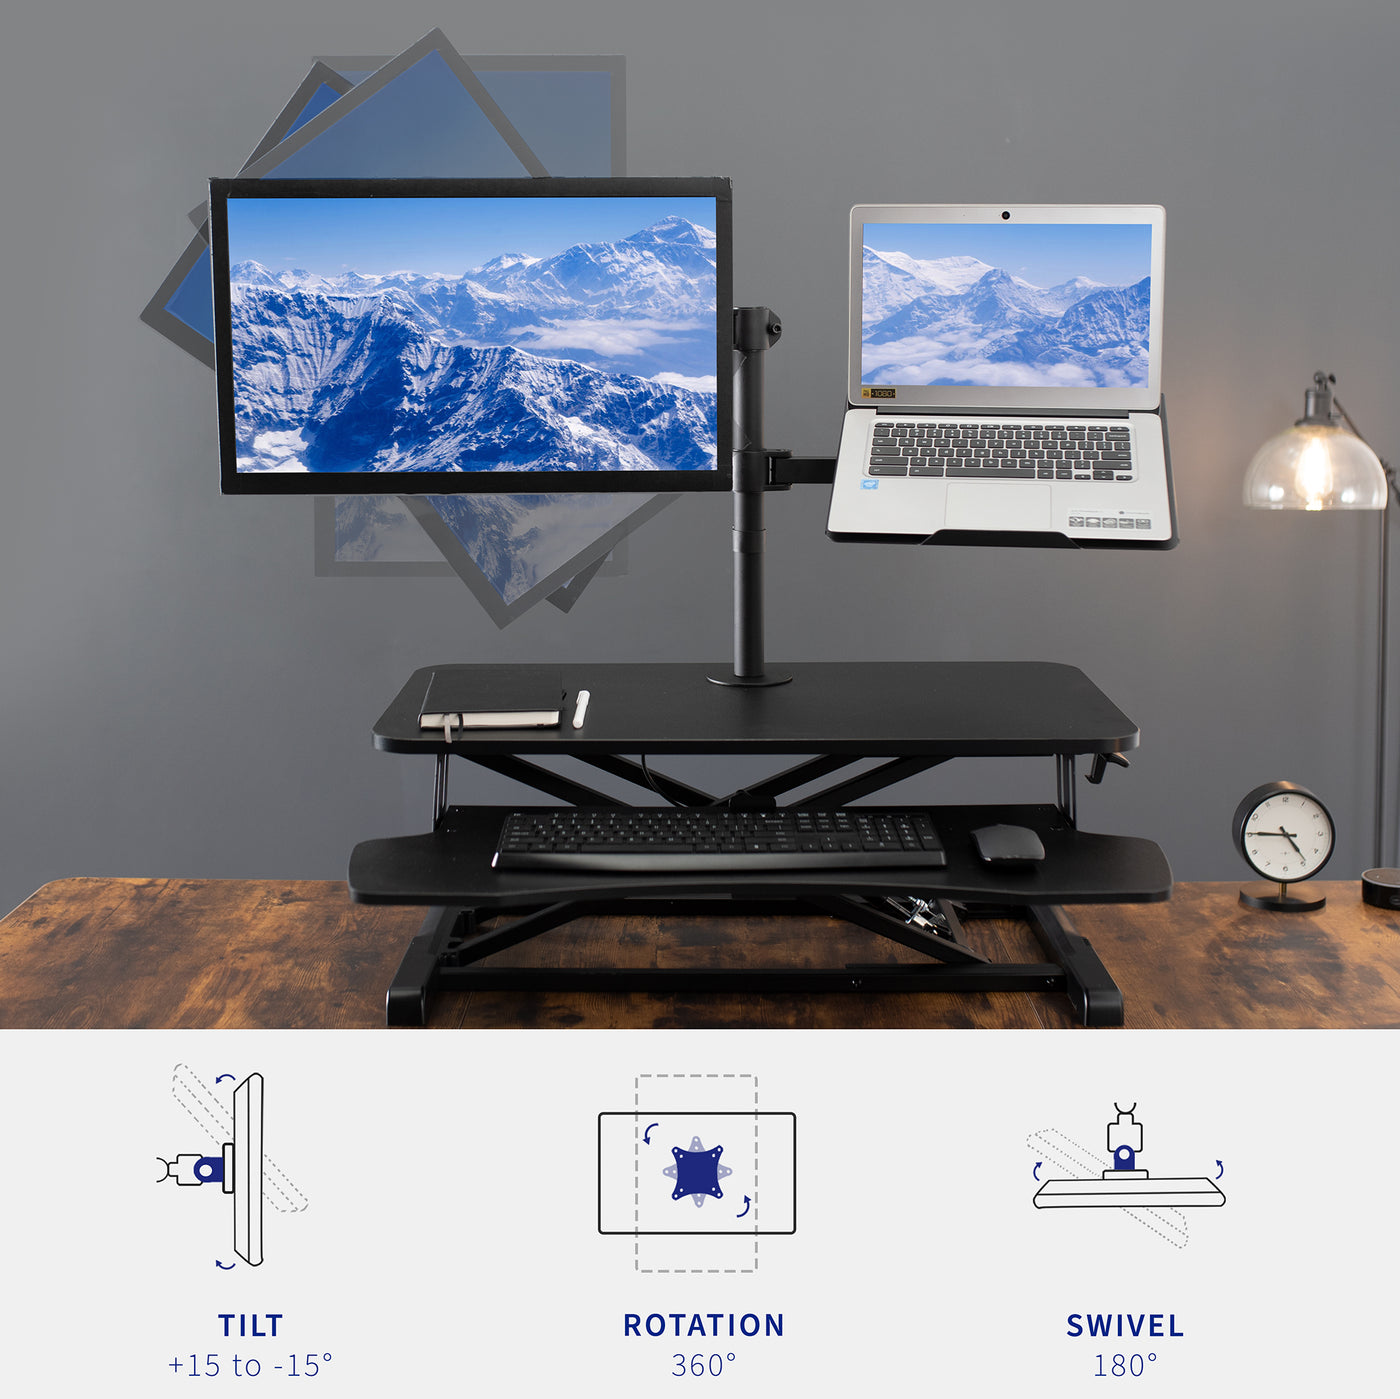 Fully articulating monitor mount and standard VESA plate.